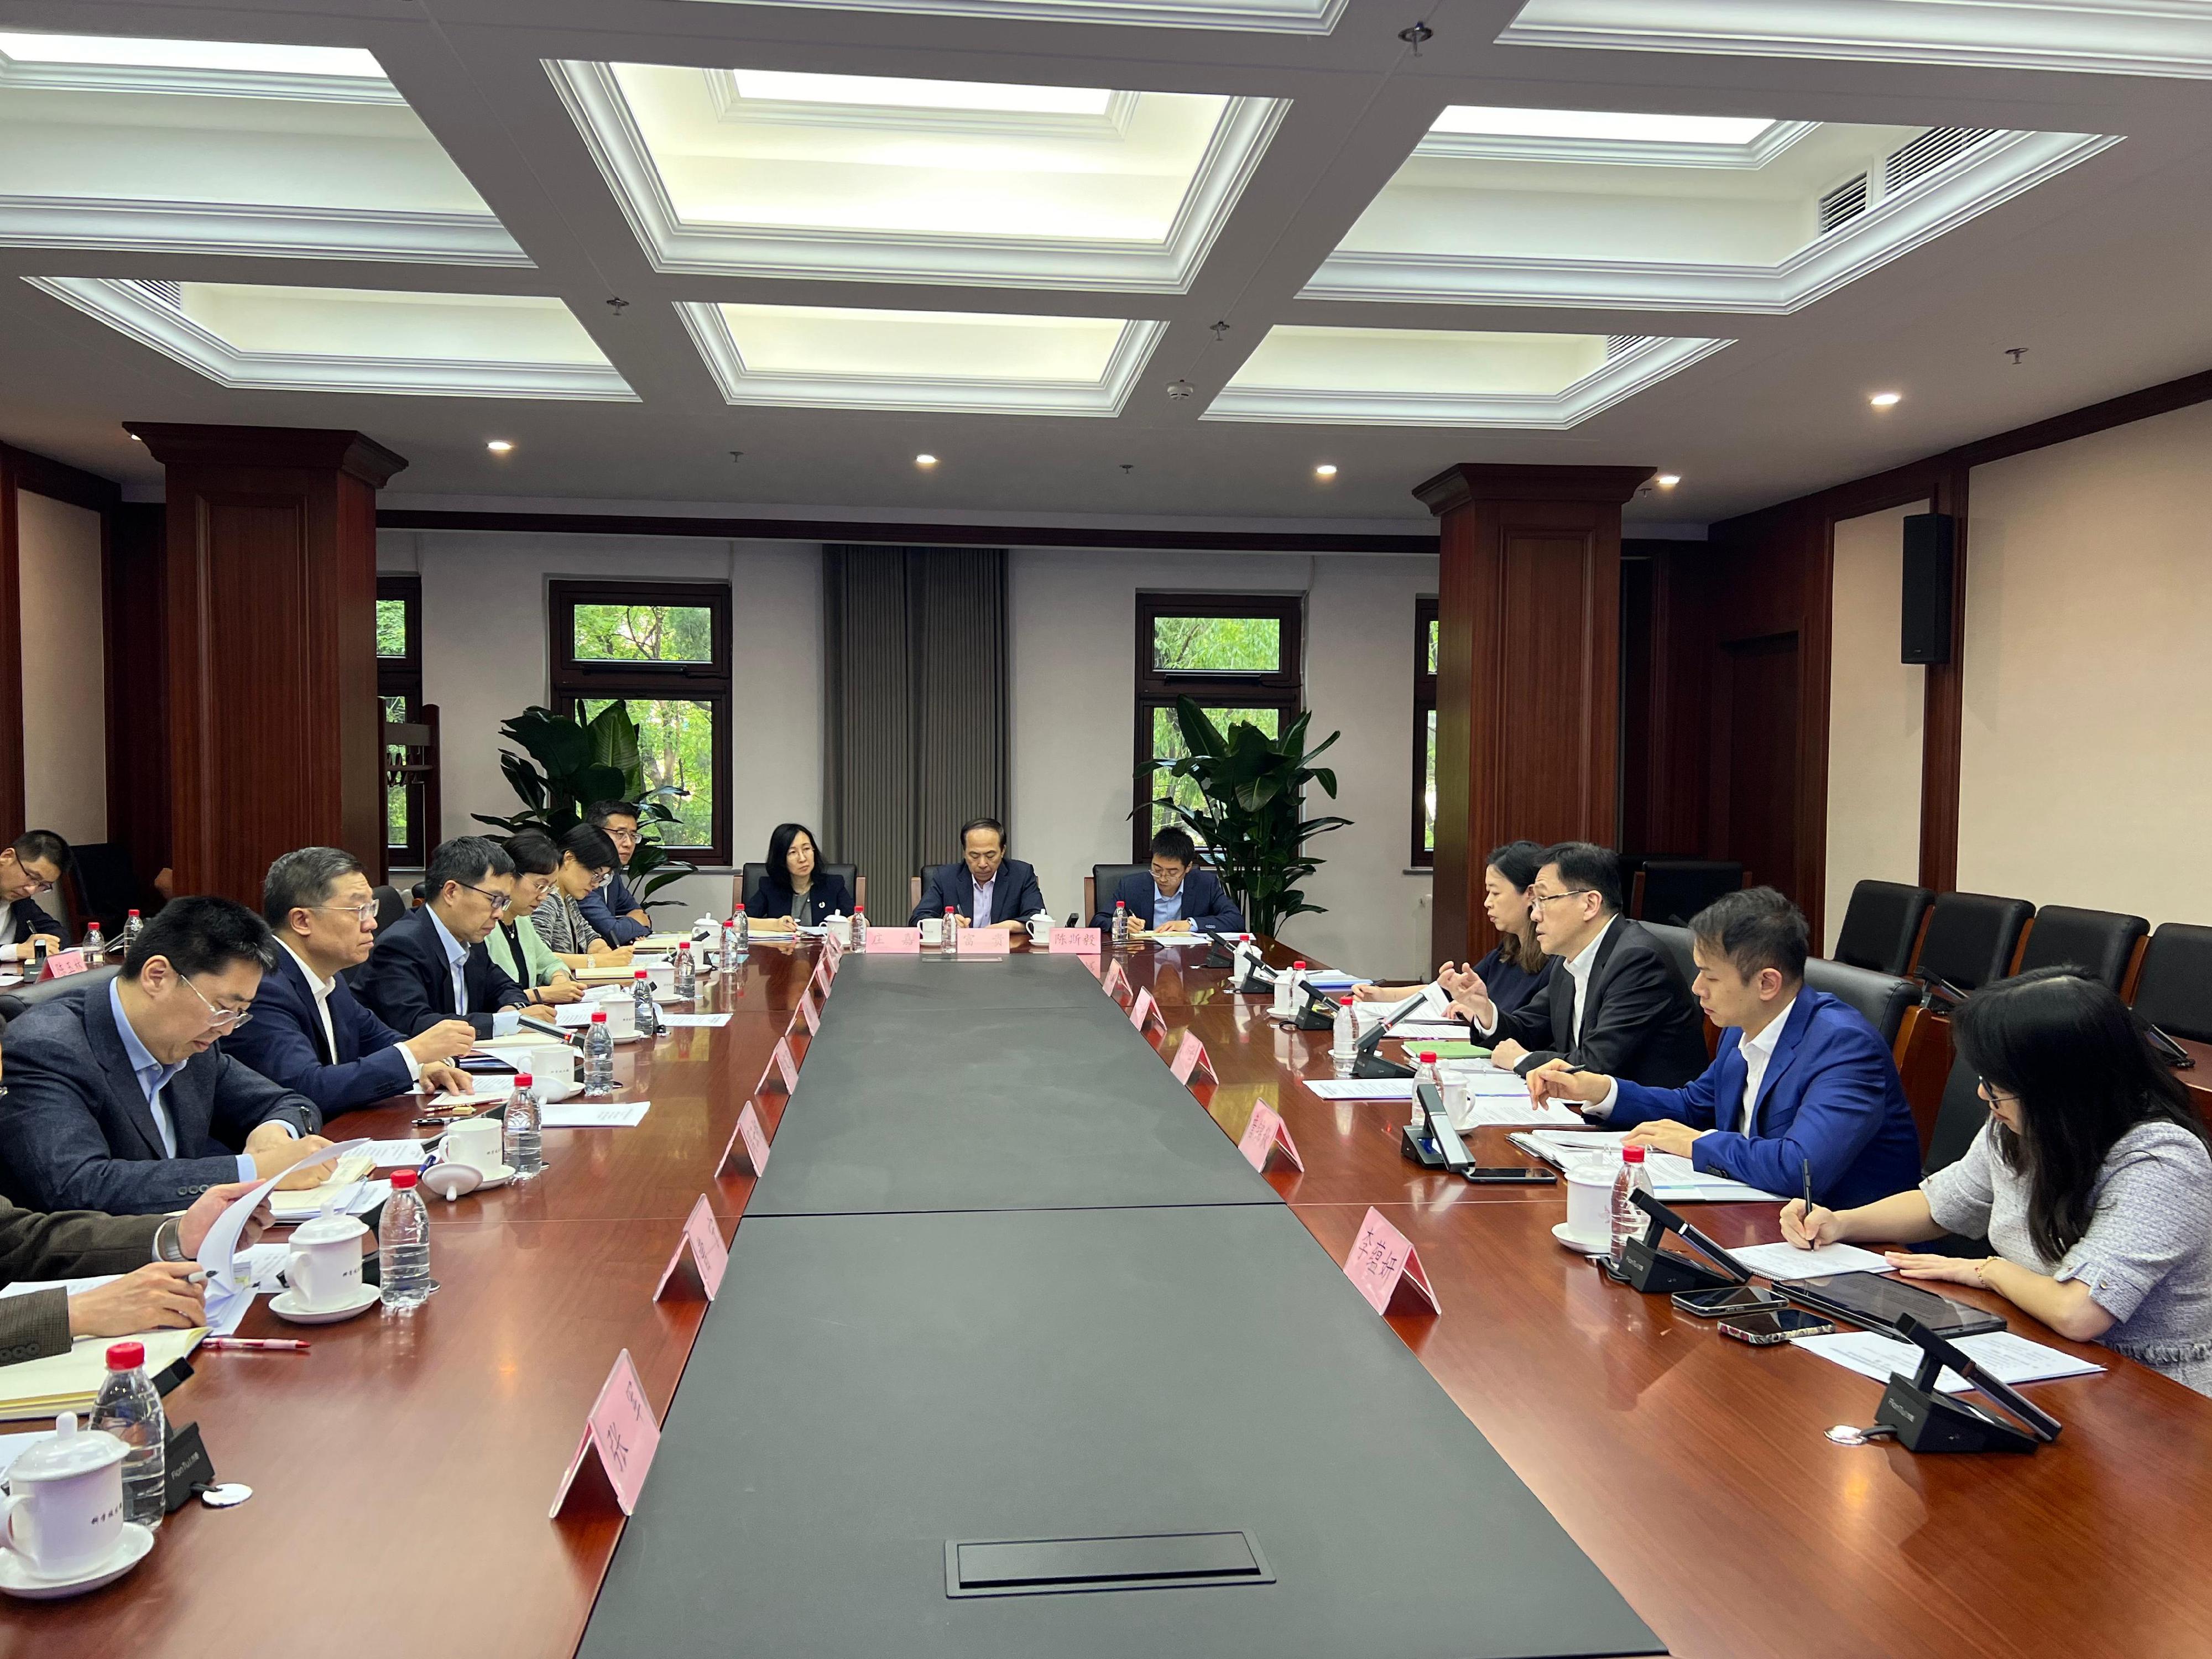 The Secretary for Innovation, Technology and Industry, Professor Sun Dong (third right), visited the Ministry of Science and Technology in Beijing today (May 9) and had a work meeting with Vice Minister of Science and Technology Mr Chen Jiachang (second left) and relevant responsible officials.